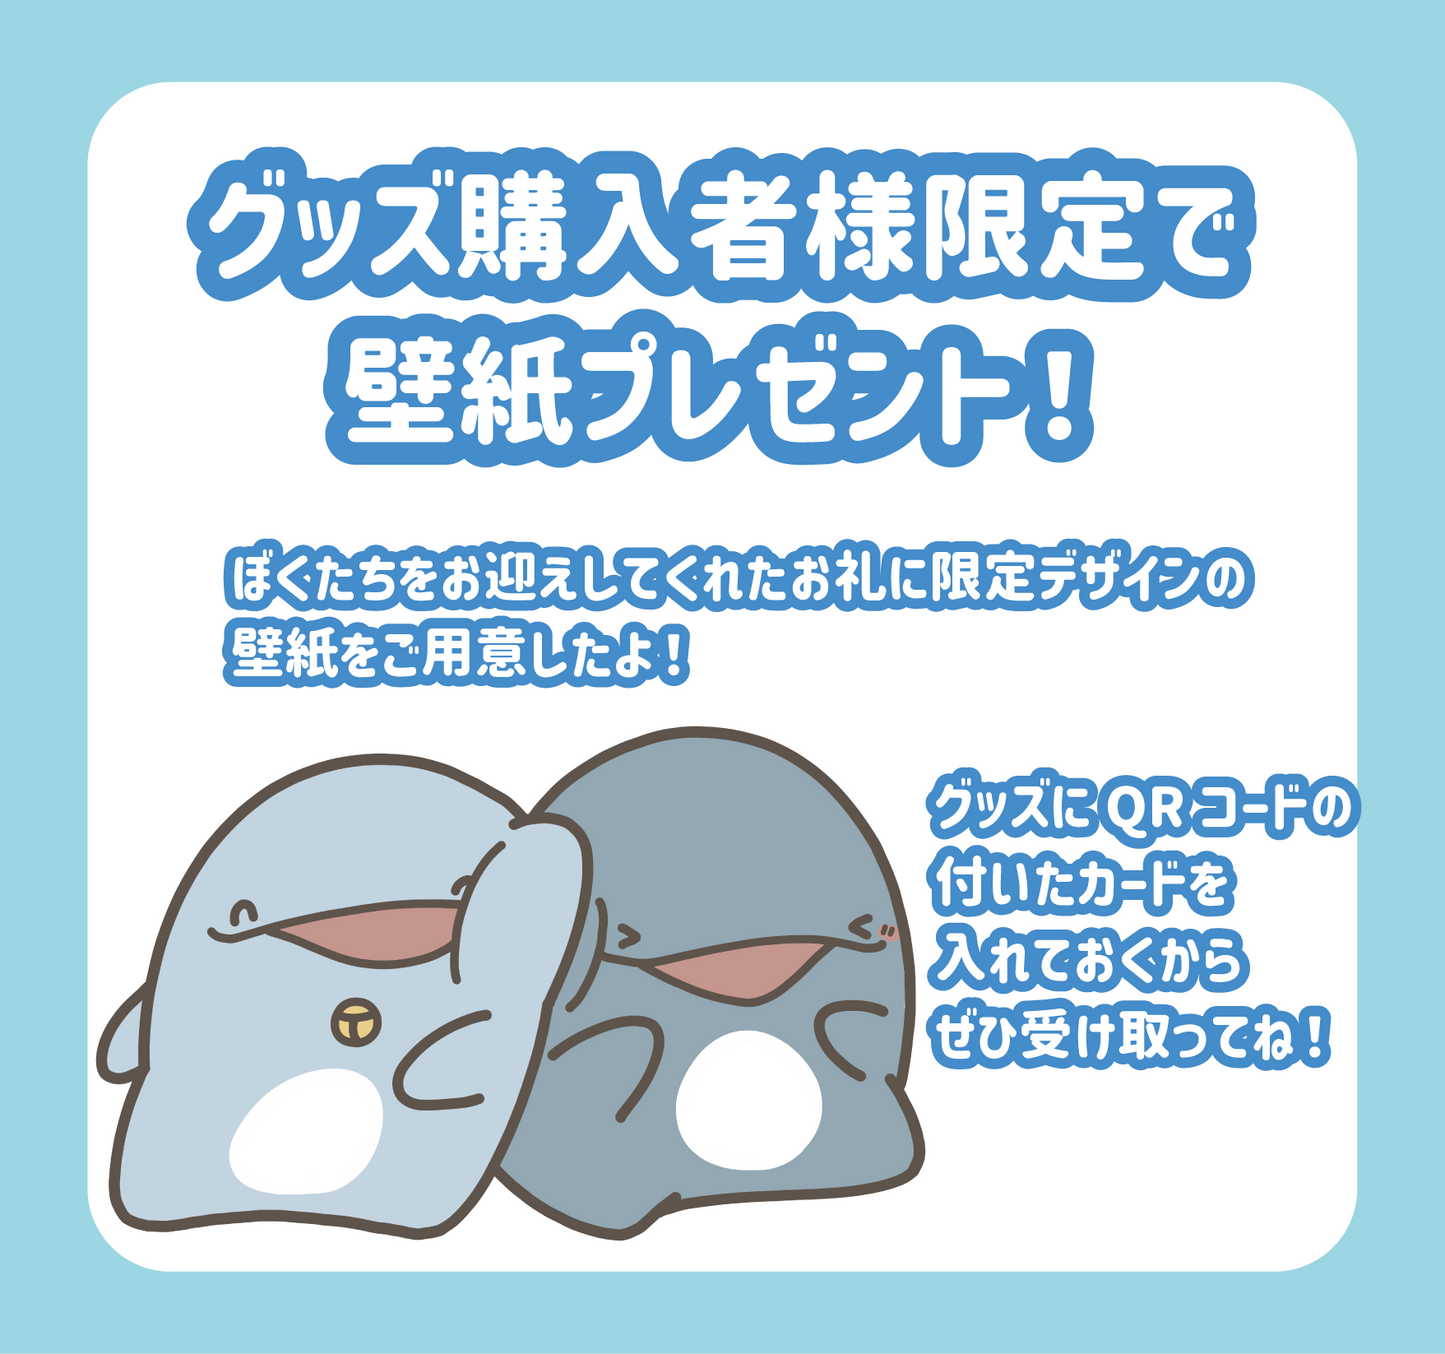 [Parent and child dolphin] Die-cut big cushion (son) [shipped in early June]